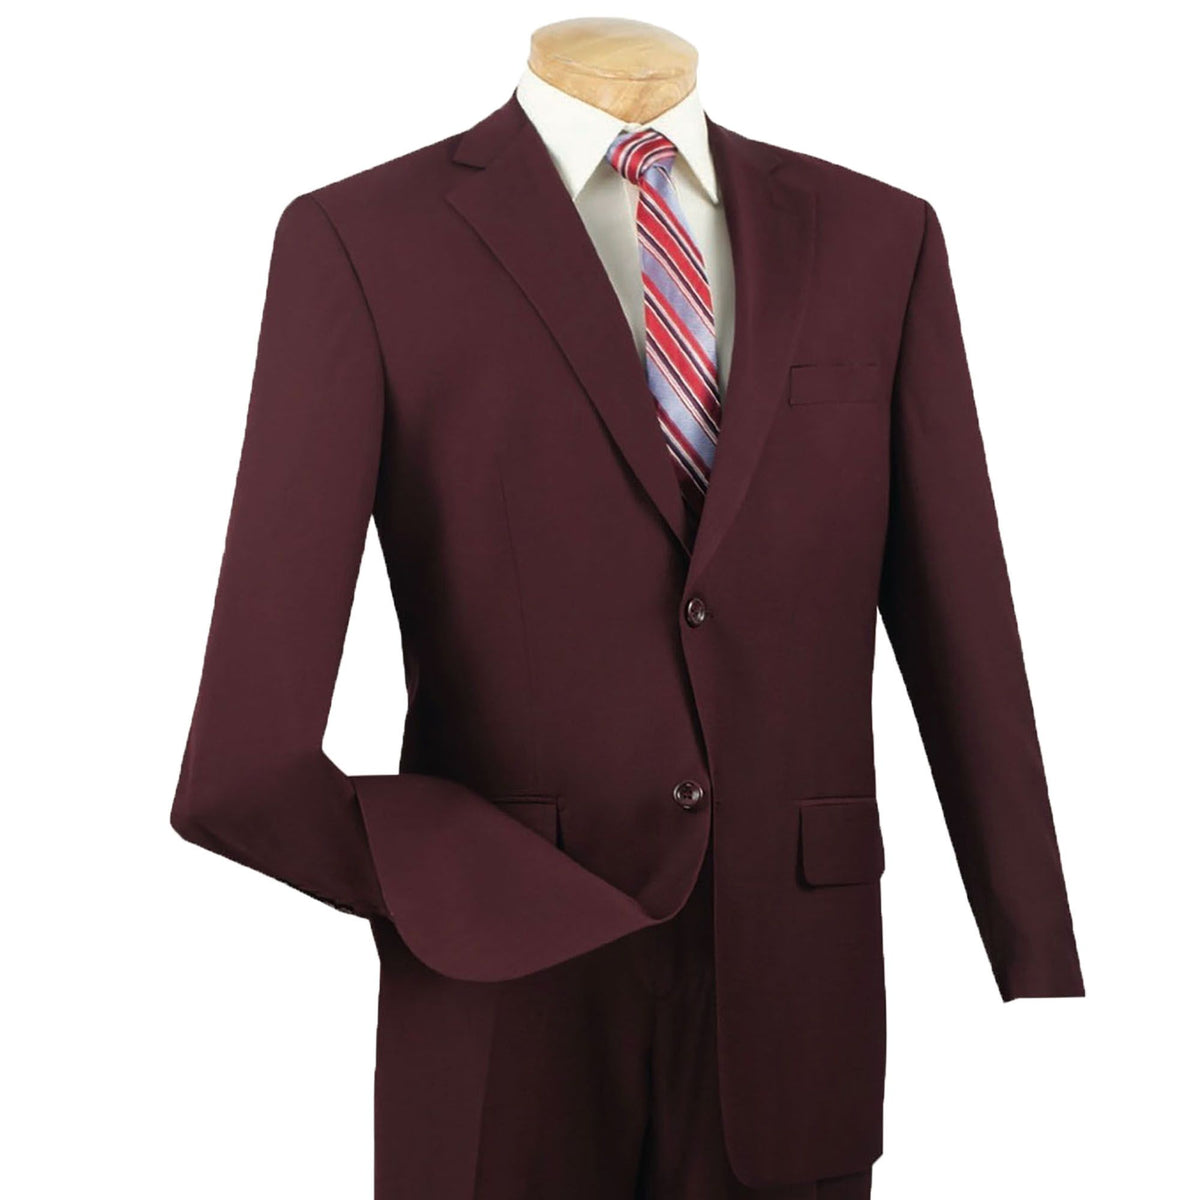 Textured Solid Classic-Fit Suit in Burgundy